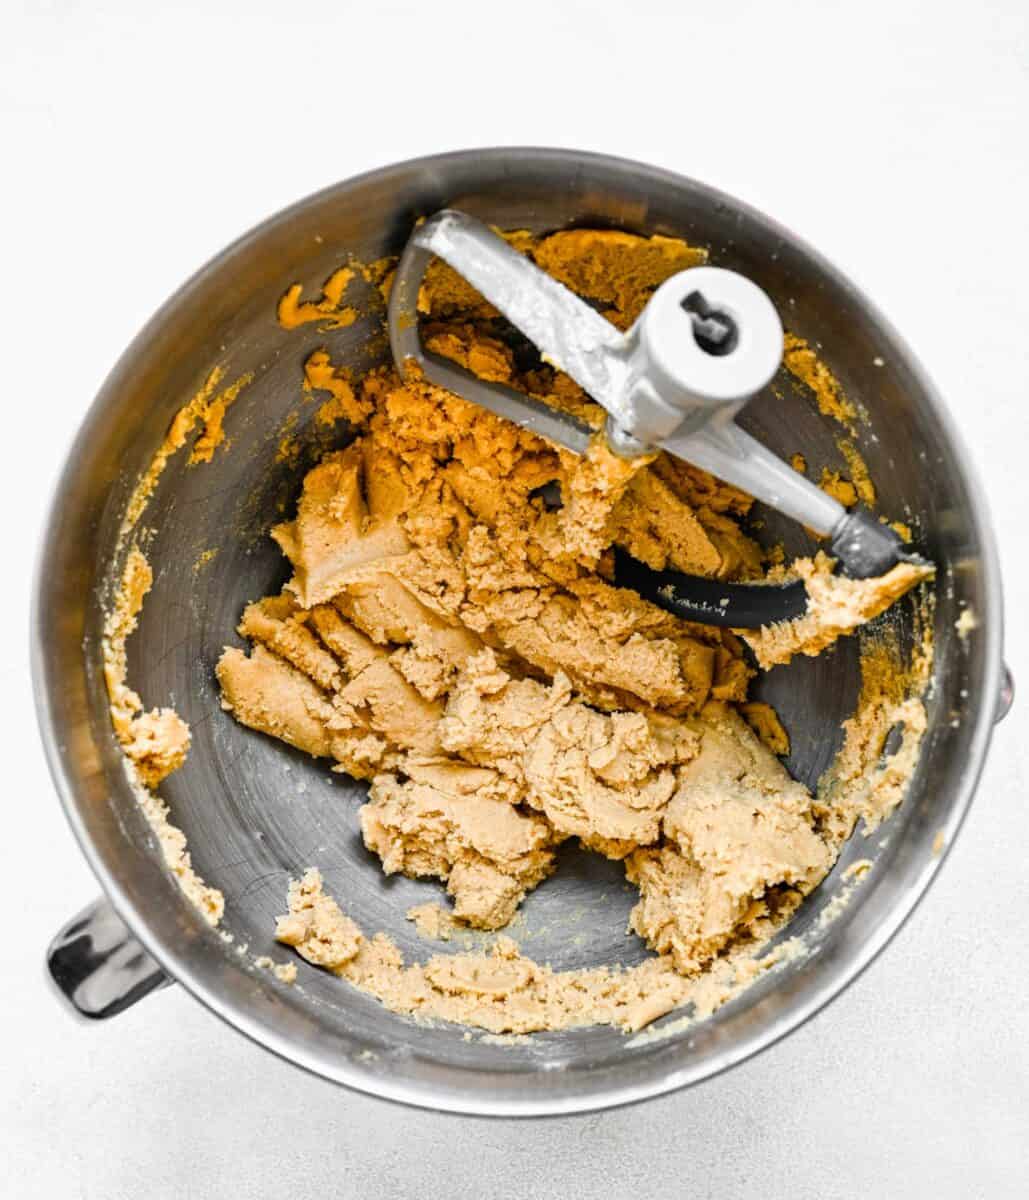 the electric mixer attachment is placed in a bowl of peanut butter cookie bar dough.